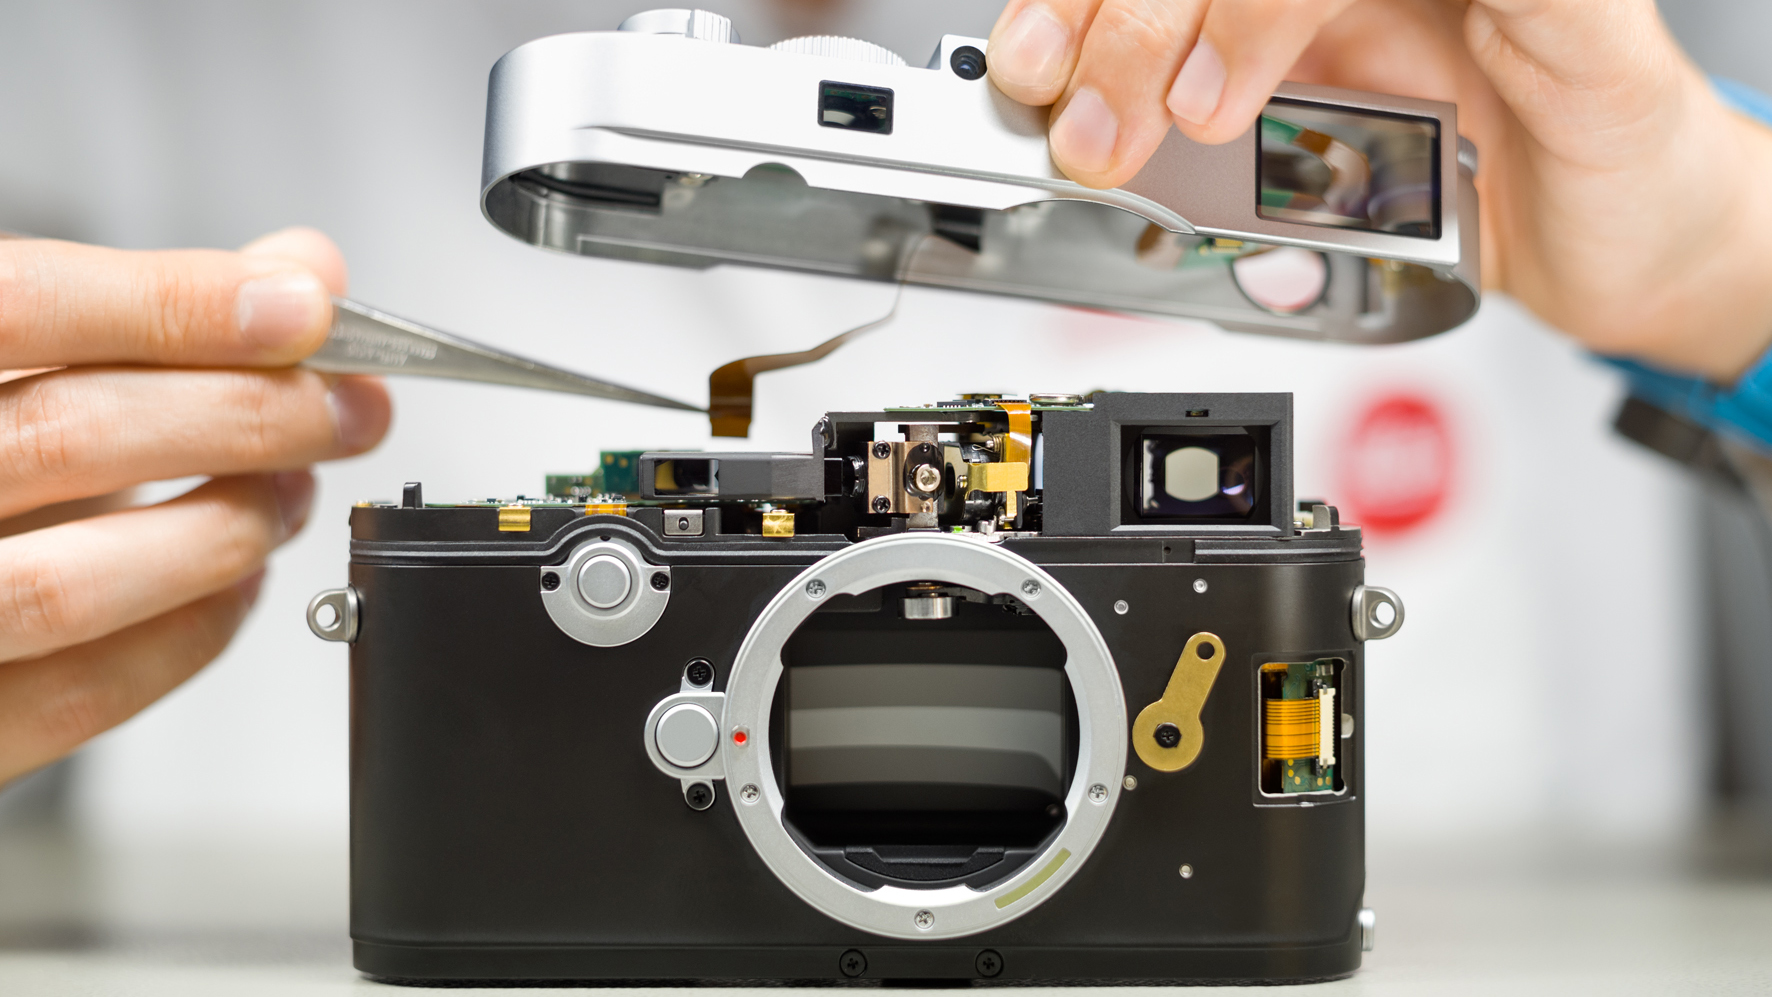 The Leica M11 being constructed with its top plate removed